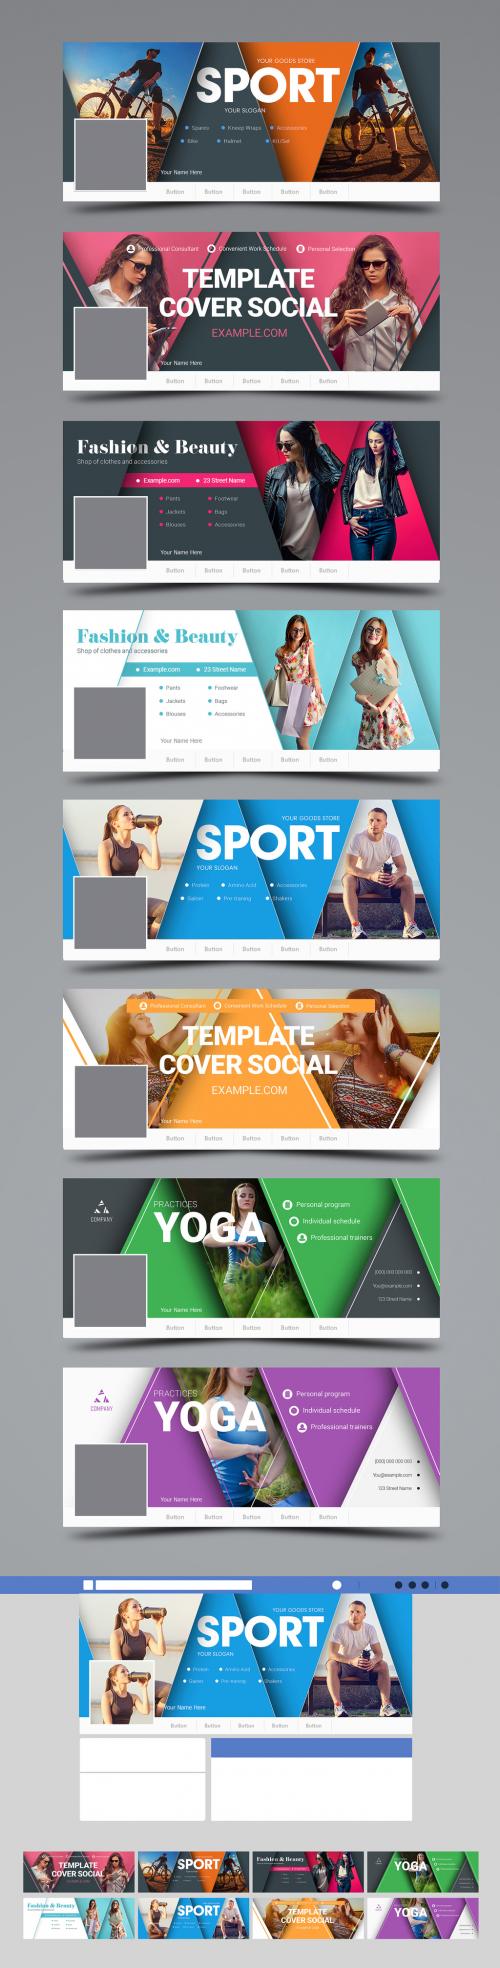 Social Media Layout Set with Triangular Elements - 210712271